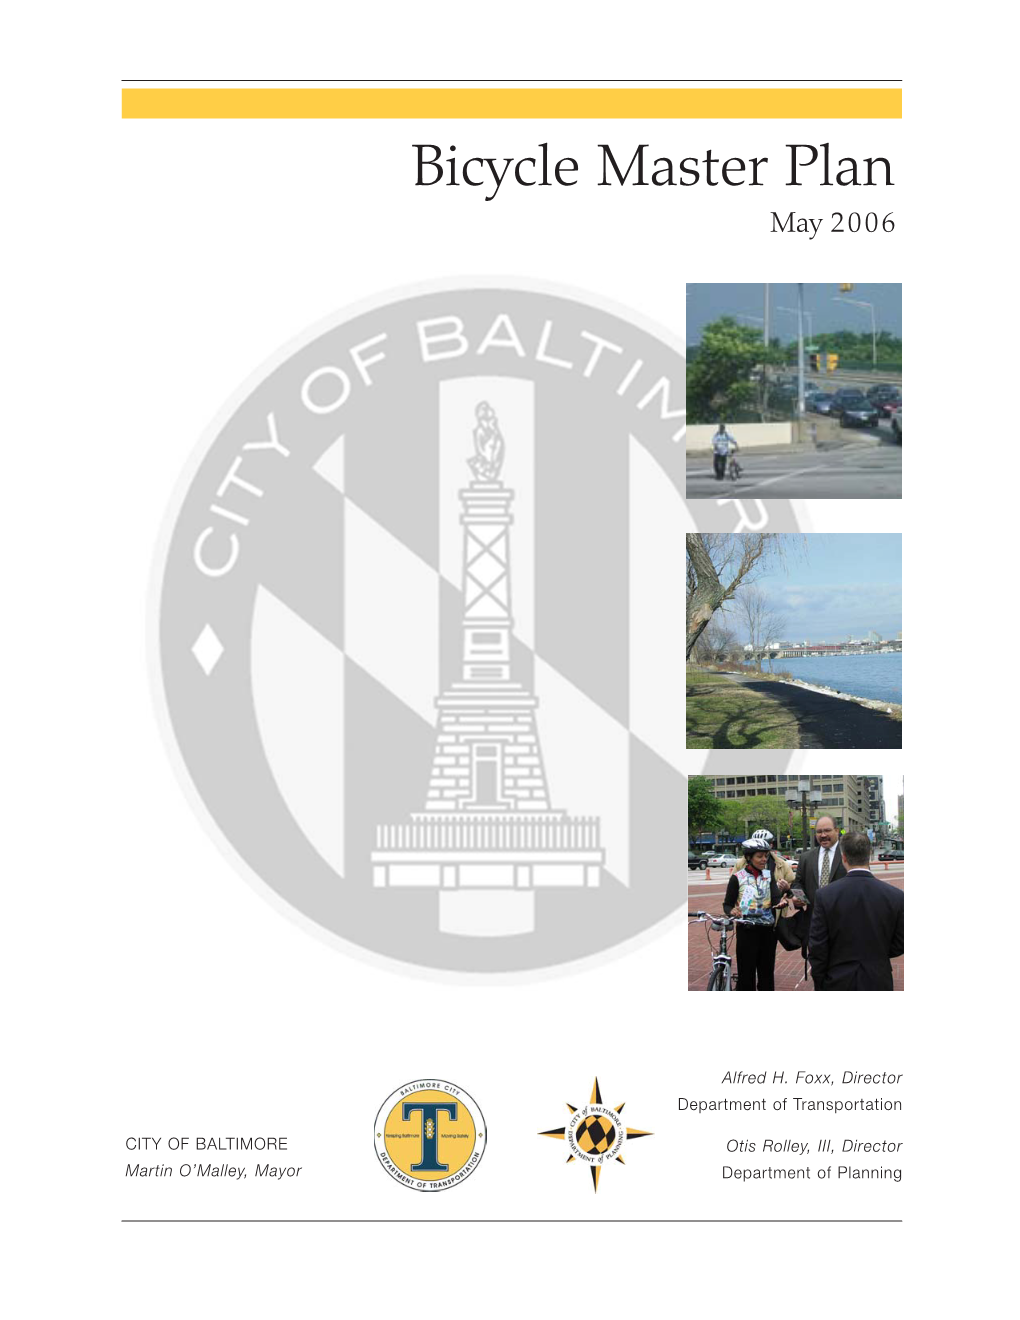 Bike Master Plan Goals and Objectives with Community Support and Input